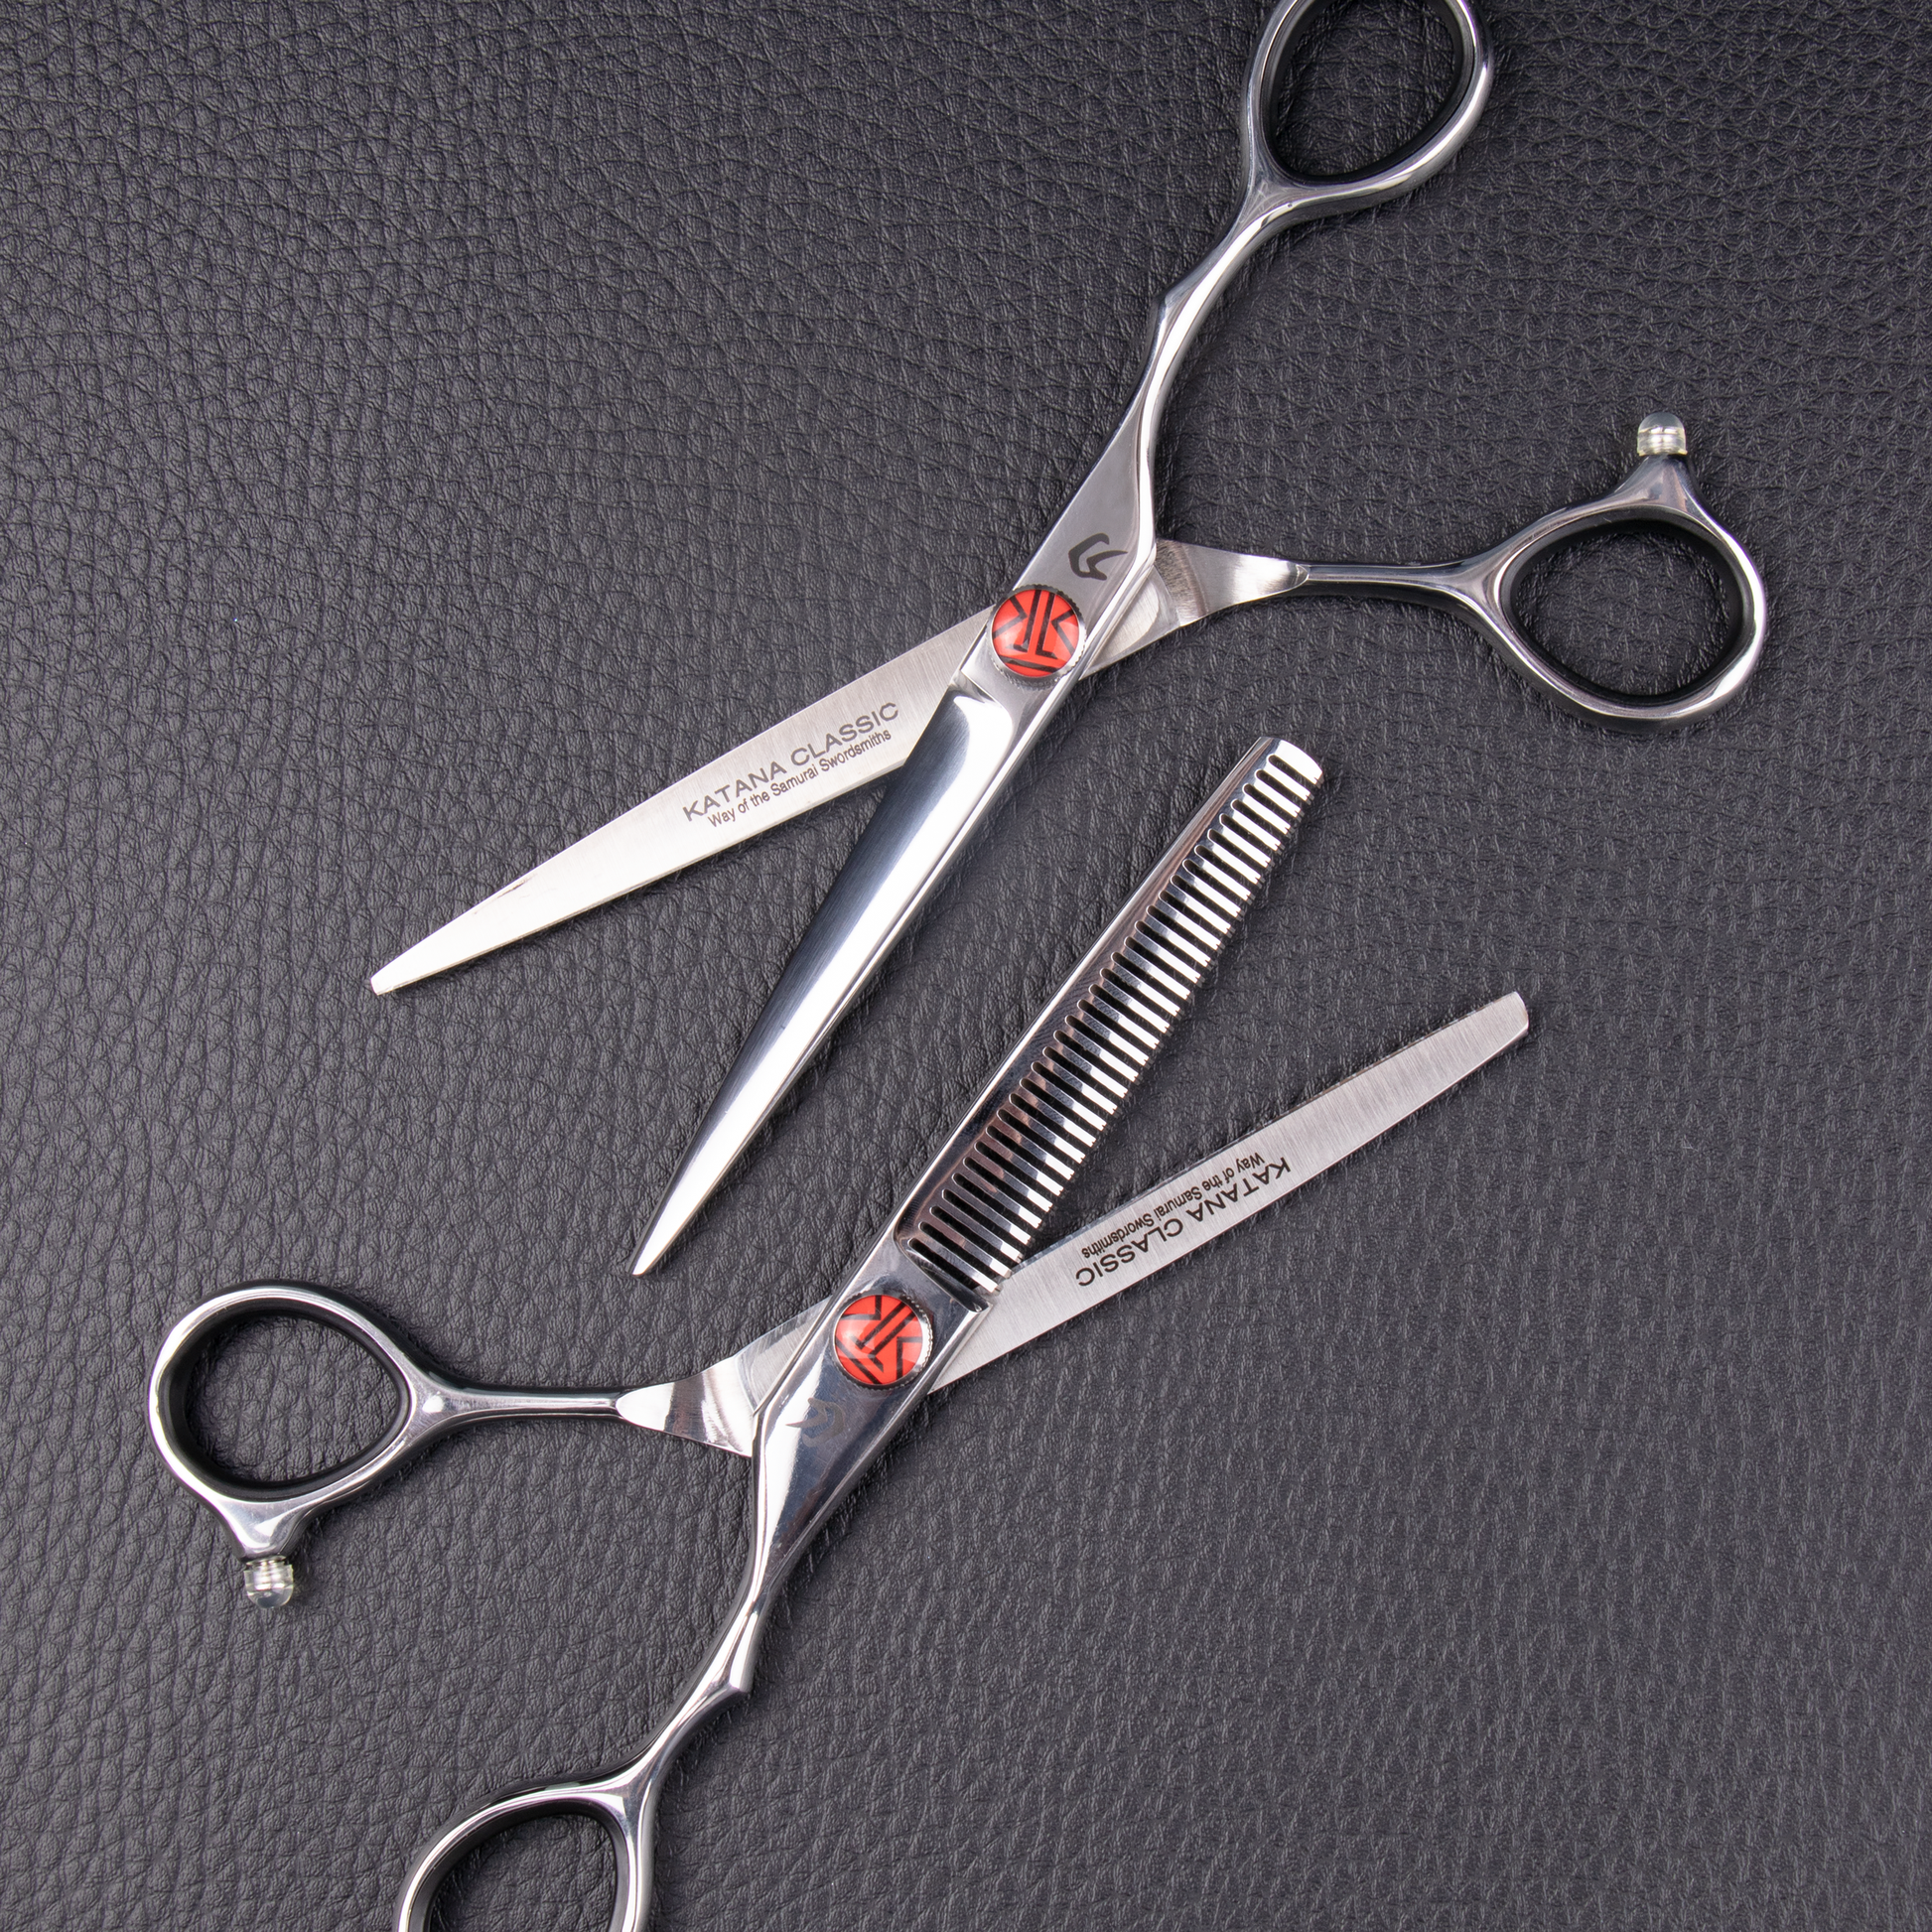 Black Professional Quality Saki Katana Set of Hair Scissors Includes Cutting and Thinning Shears Plus Razor and Leather Case, 7 inch Set